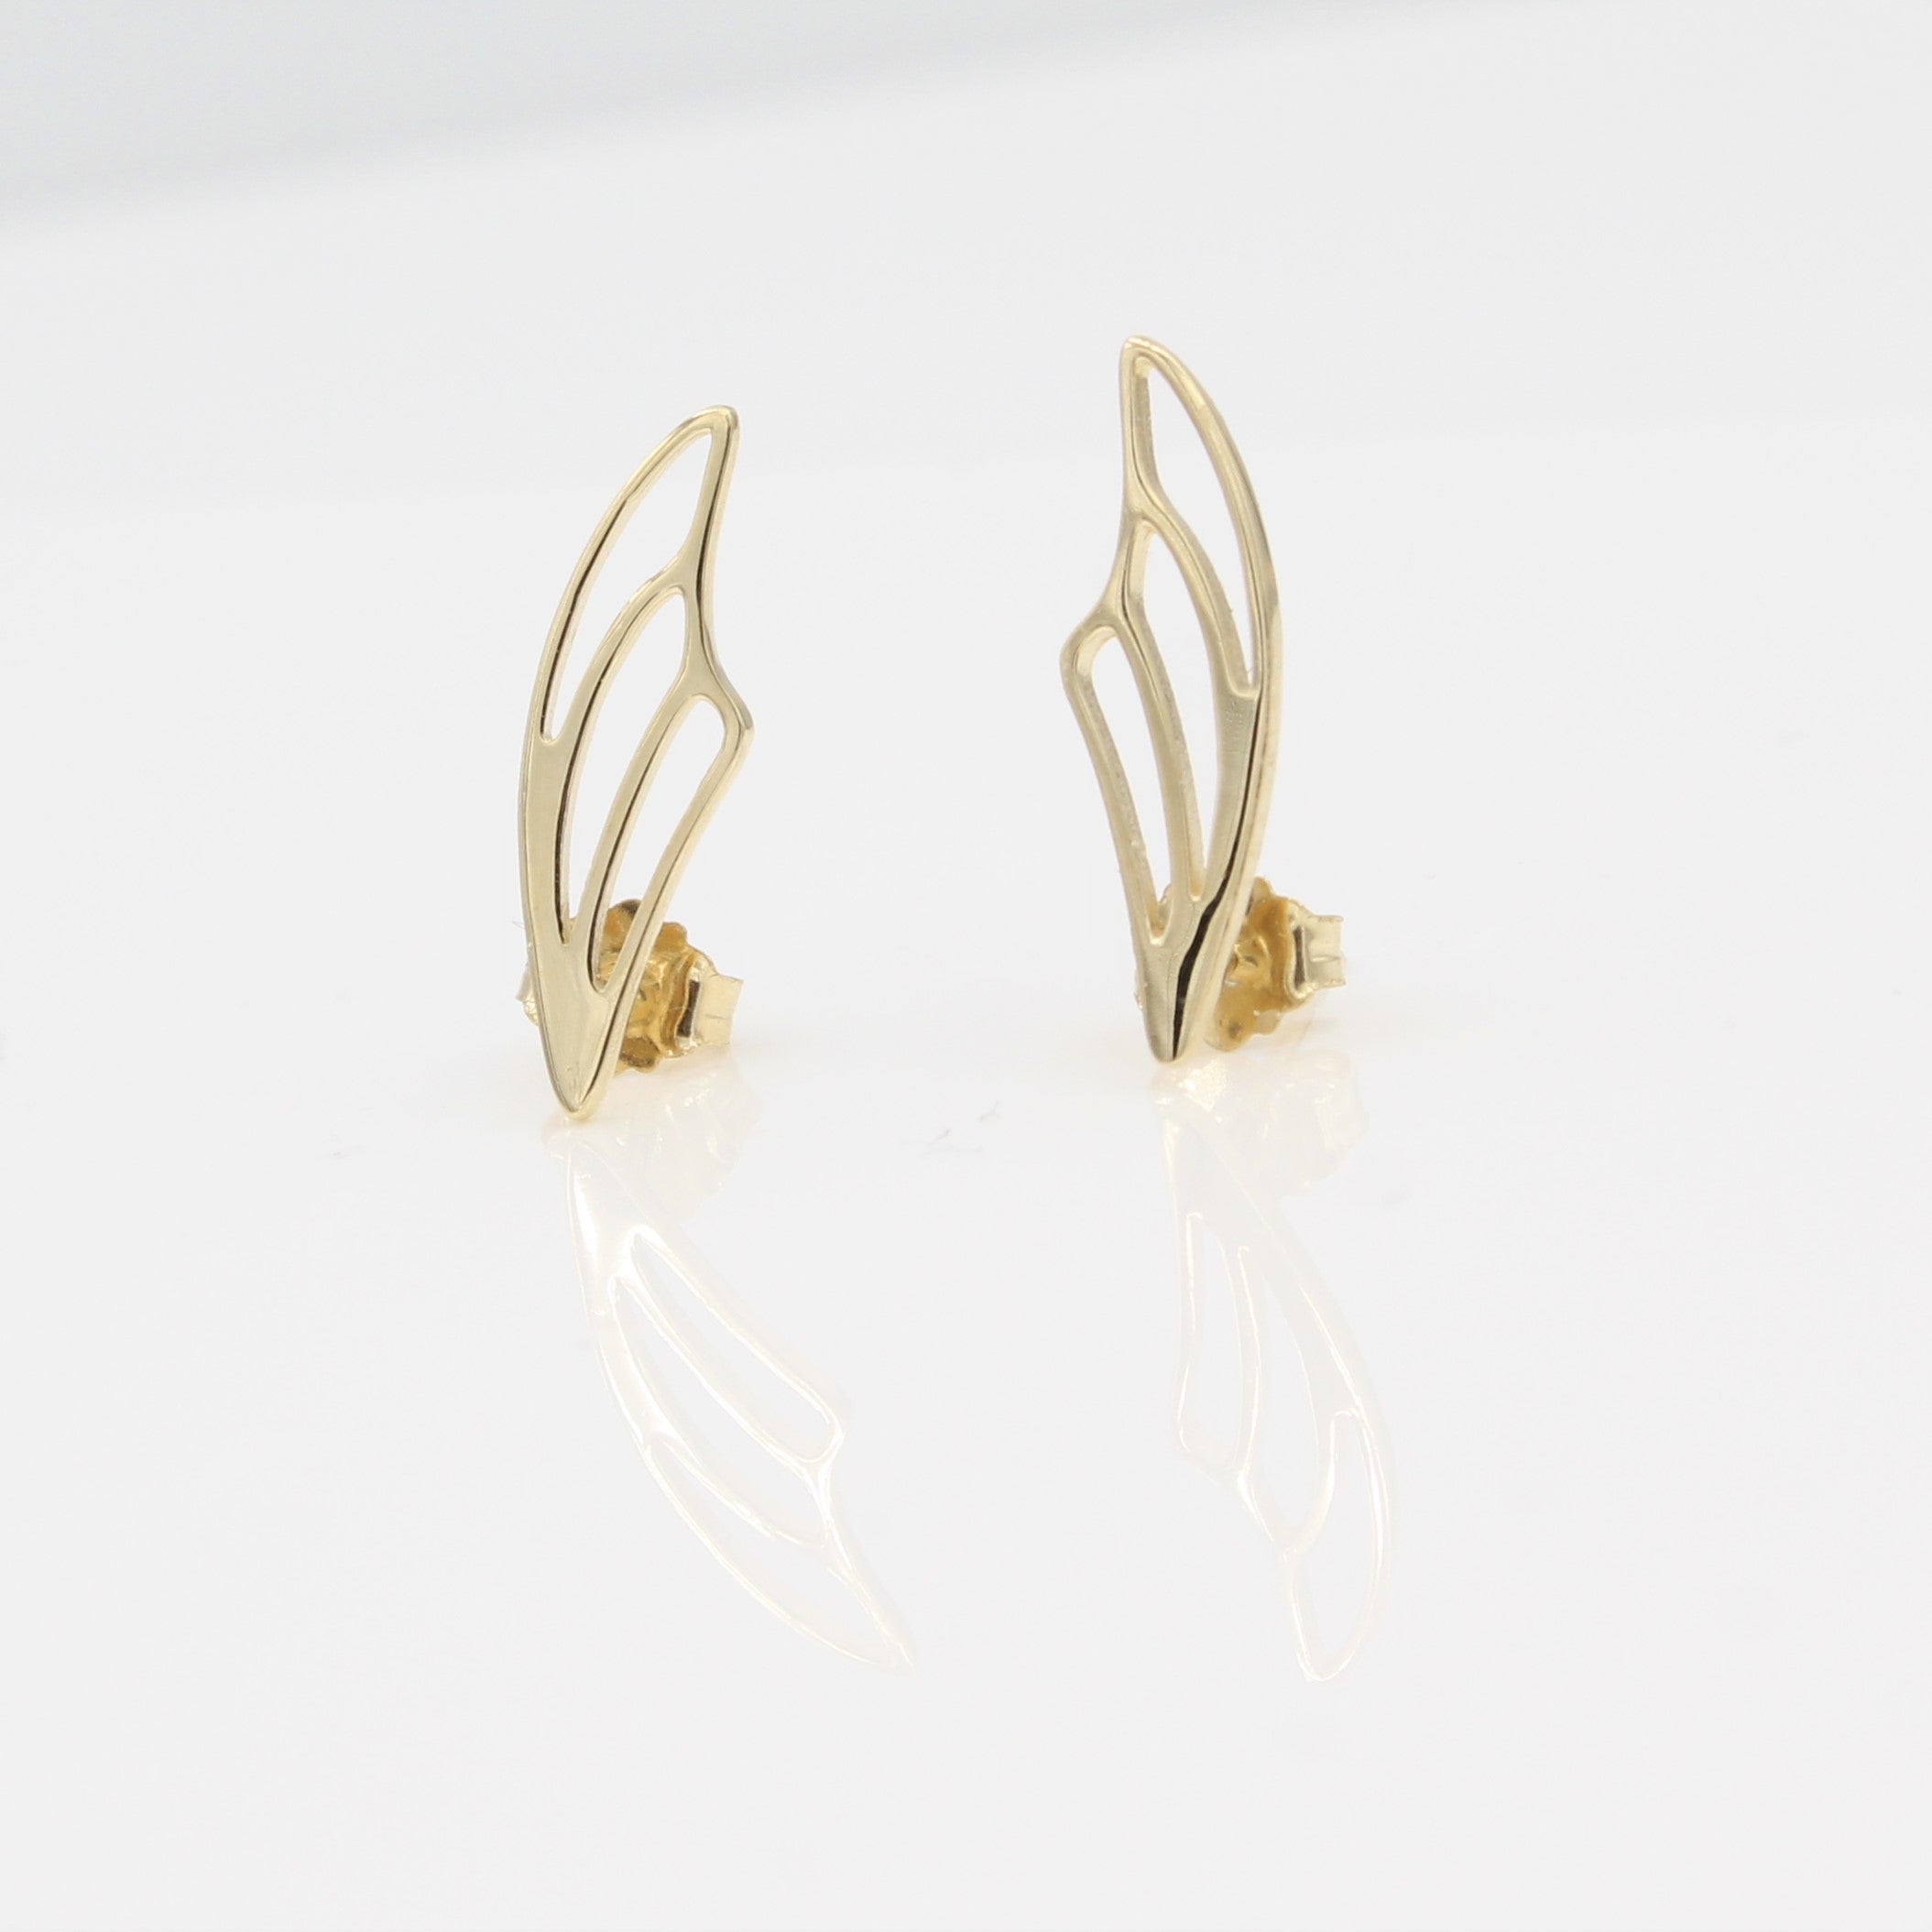 14k Yellow Gold Fairy Wing Ear Climbers Earrings with Posts, close-up front view.